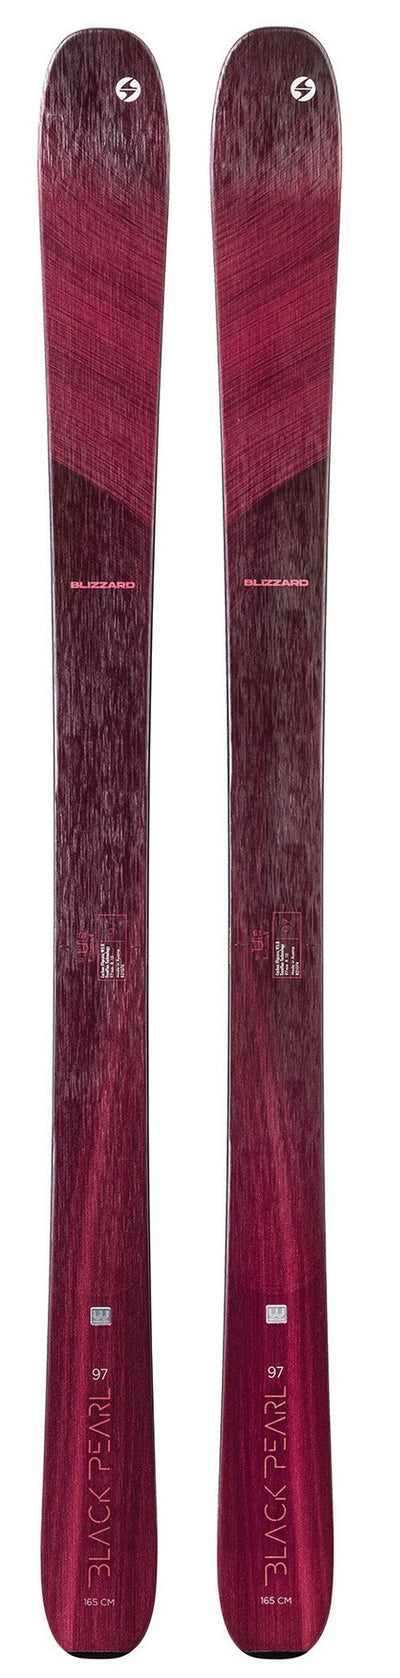 2022 Blizzard Black Pearl 97 ladies snow skis - ProSkiGuy your Hometown Ski Shop on the web